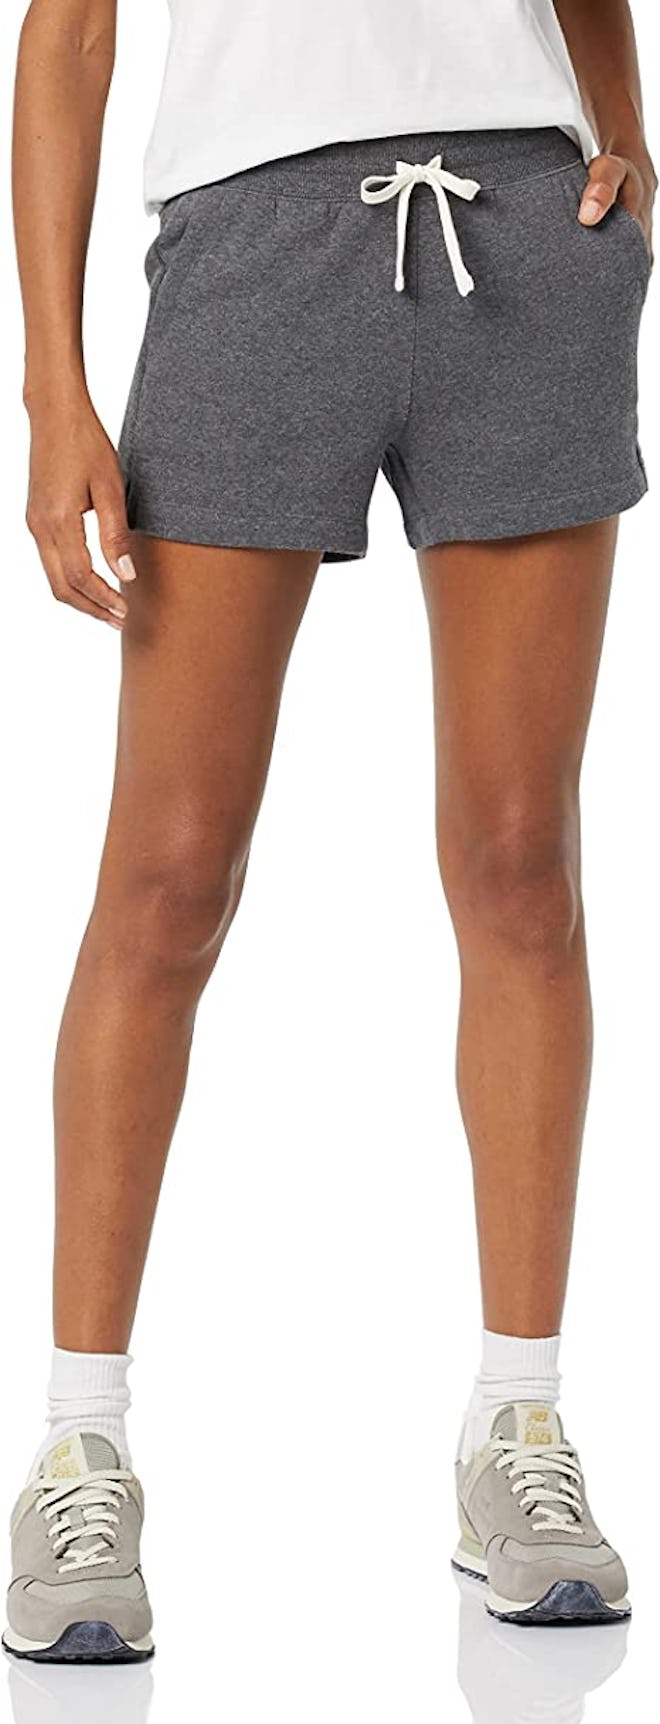 These fleece sweat shorts are thick and plush.